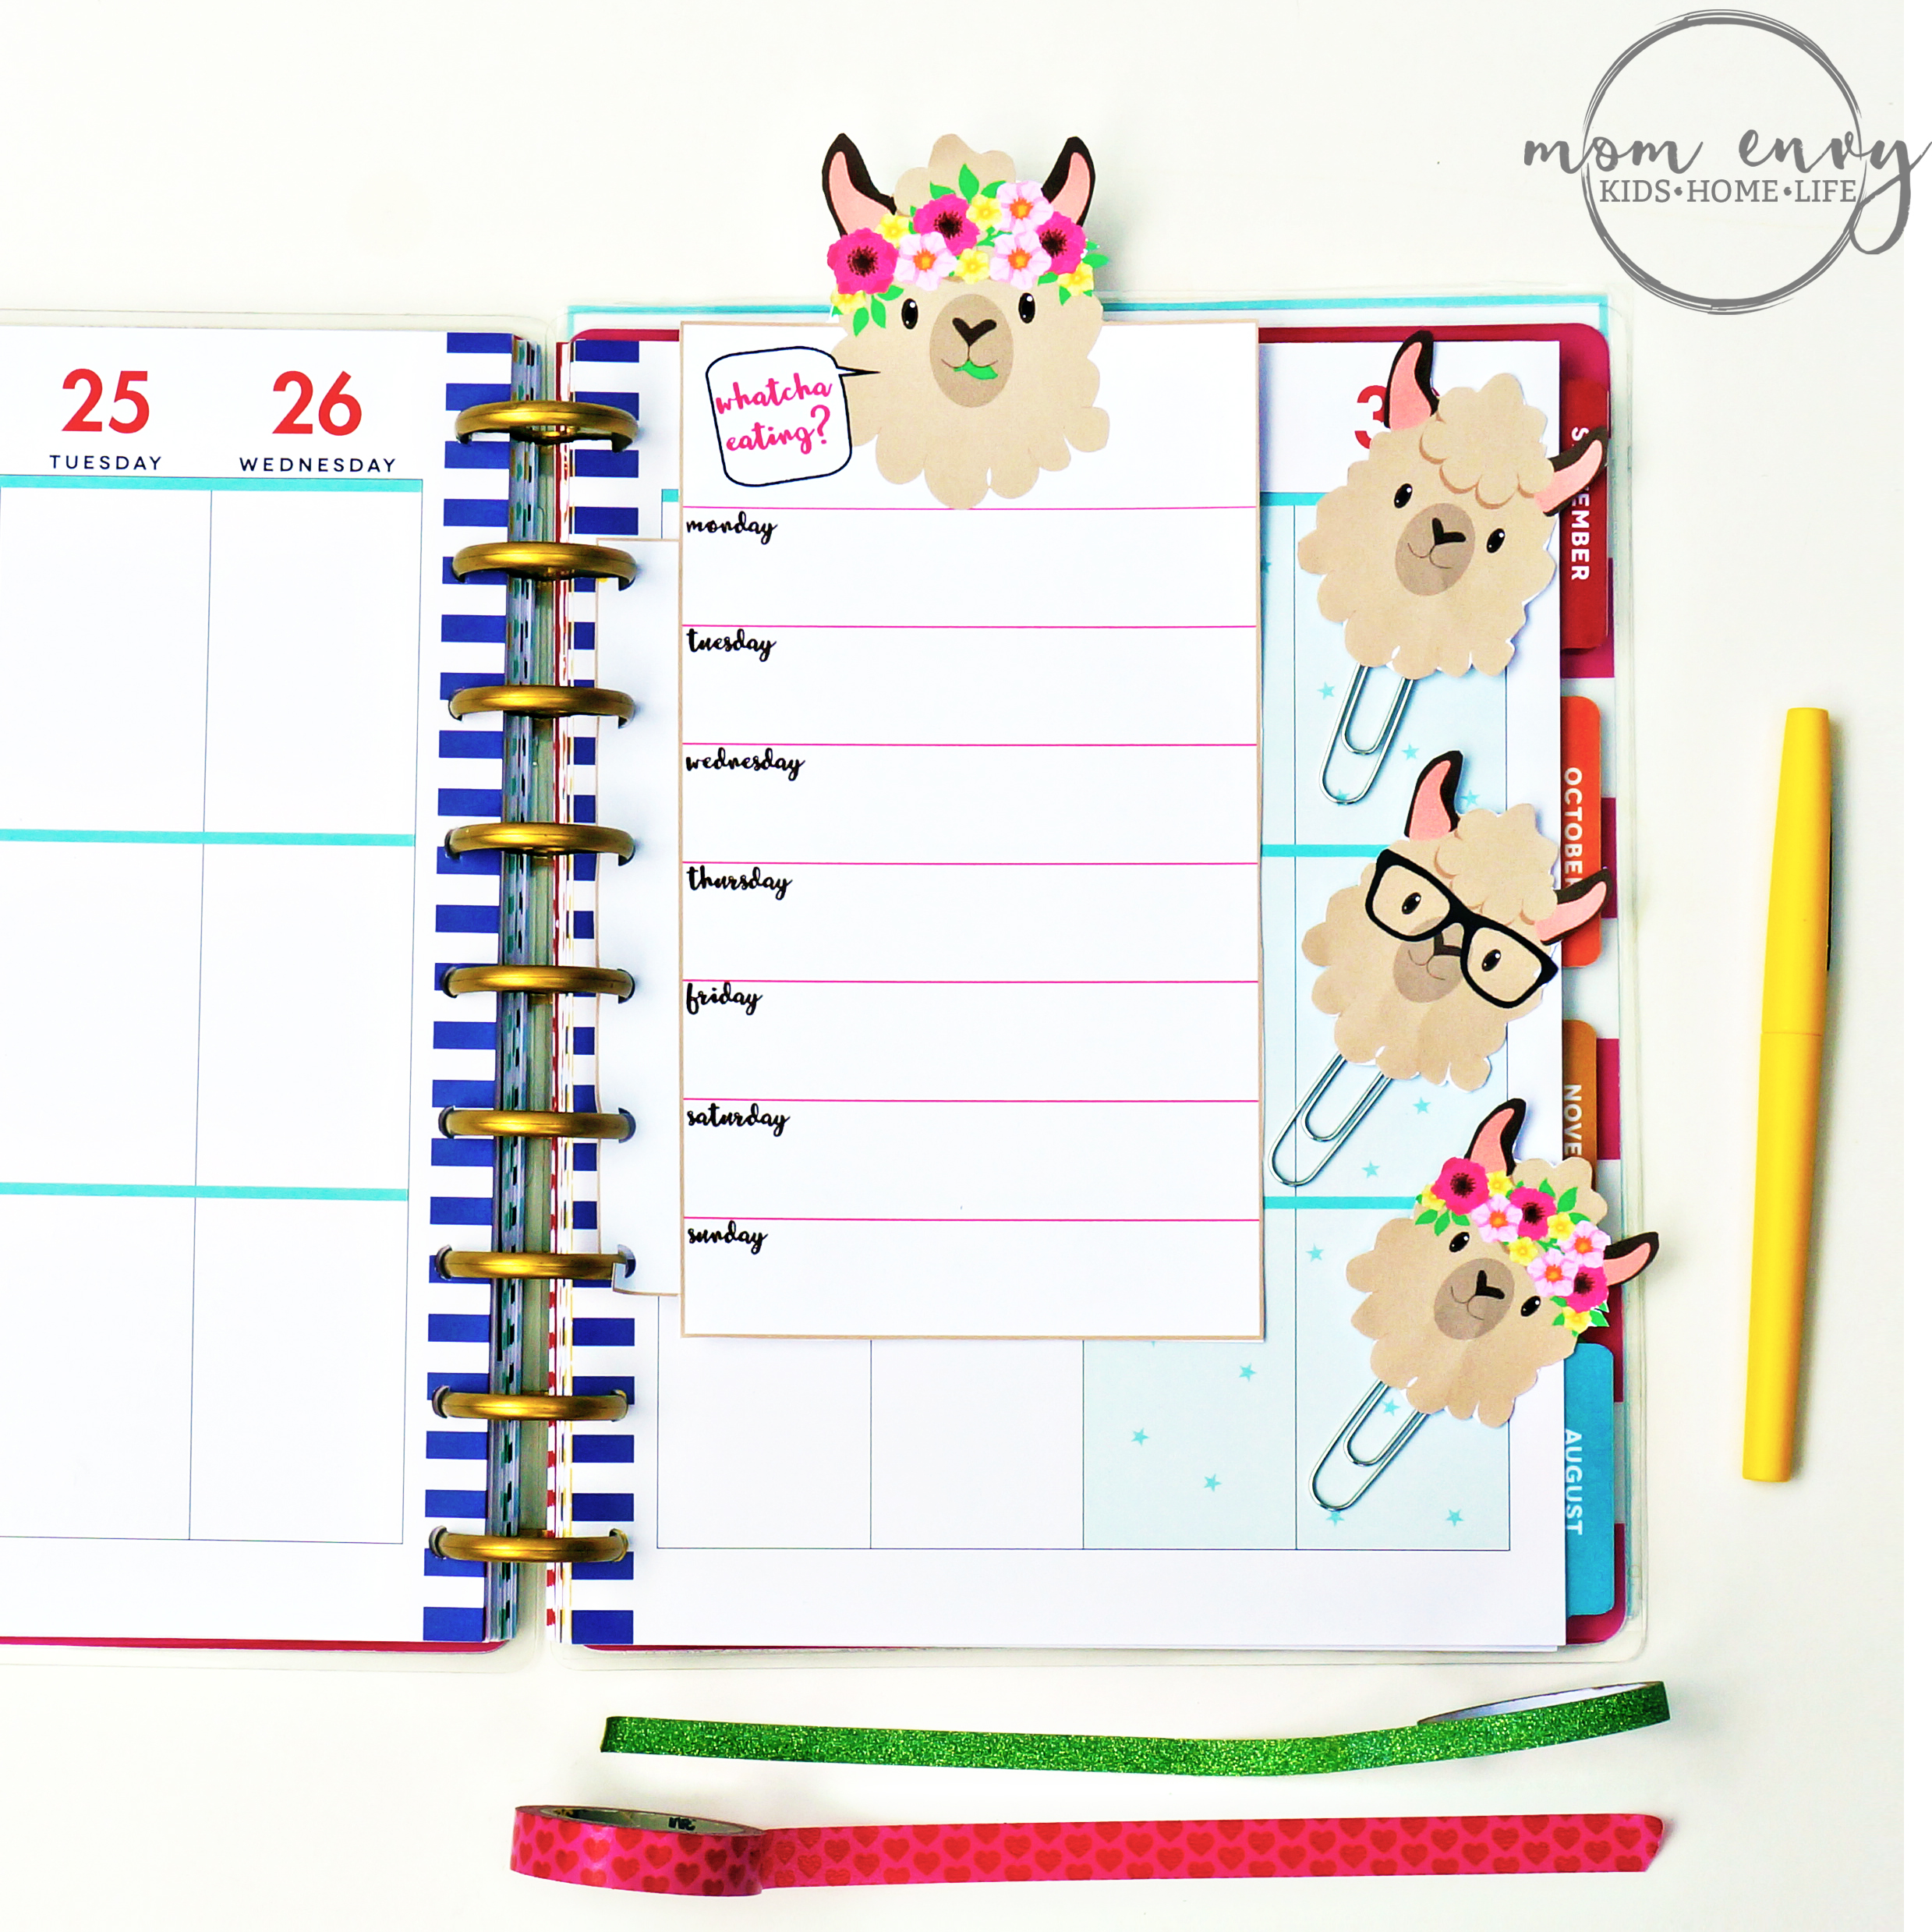 Free Llama Planner Inserts & Planner Clips - Free Planner Accessories. Free Happy Planner printables. Free llama planner printables. Free silhouette files. Free Erin Condren printables. Recollecitons planner printables. Free planner printables. Free planner clips.